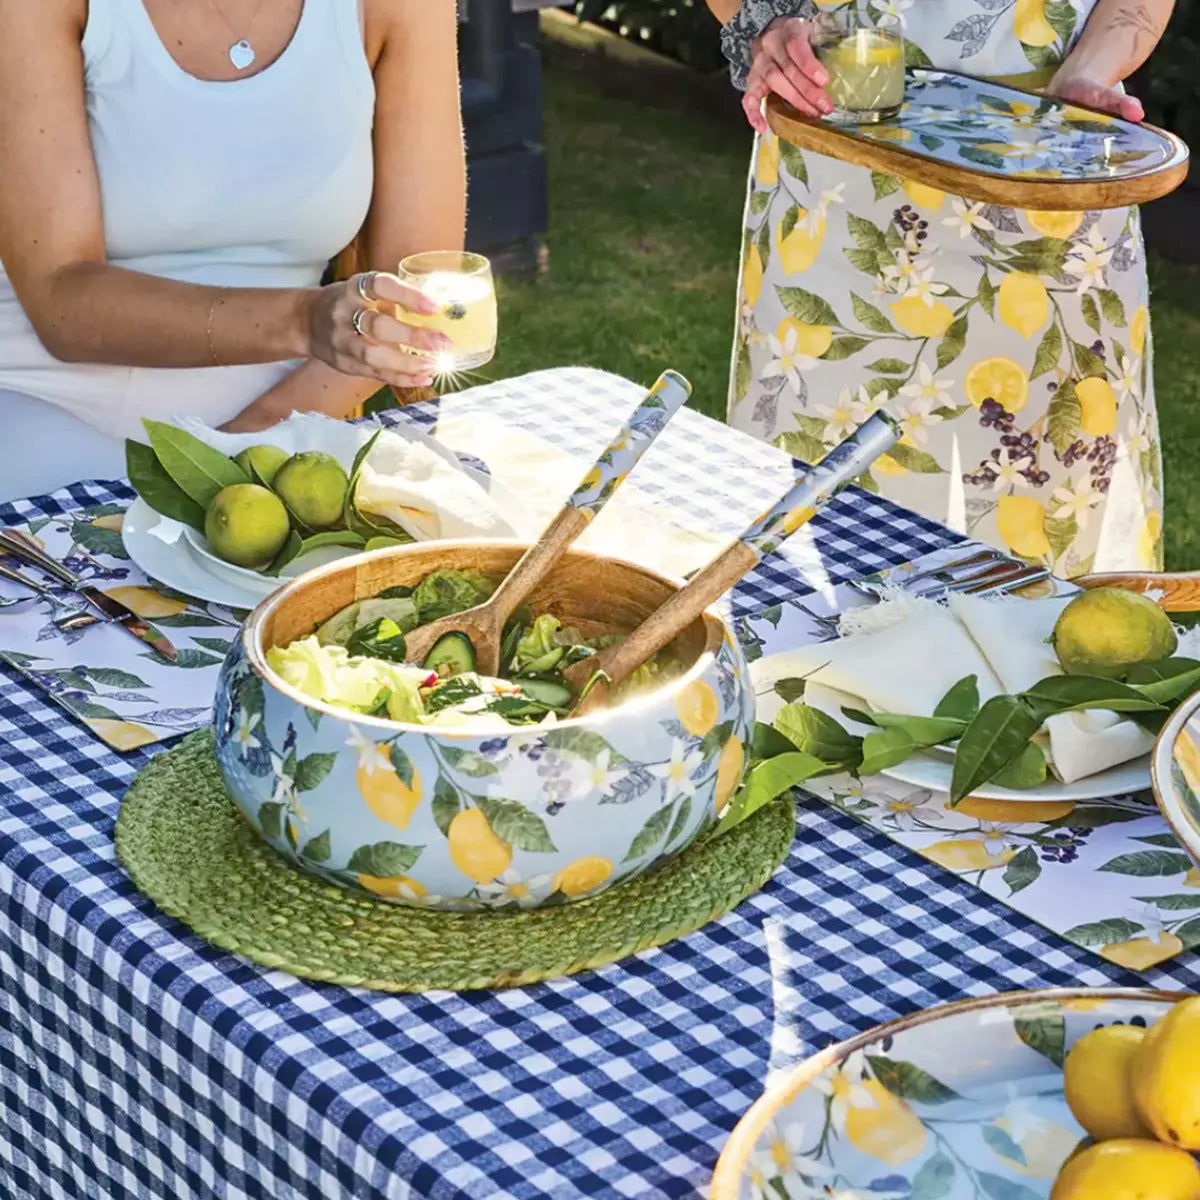 Two women are sitting at a table with a j.elliot Lemon Salad Bowl tablecloth and plates.